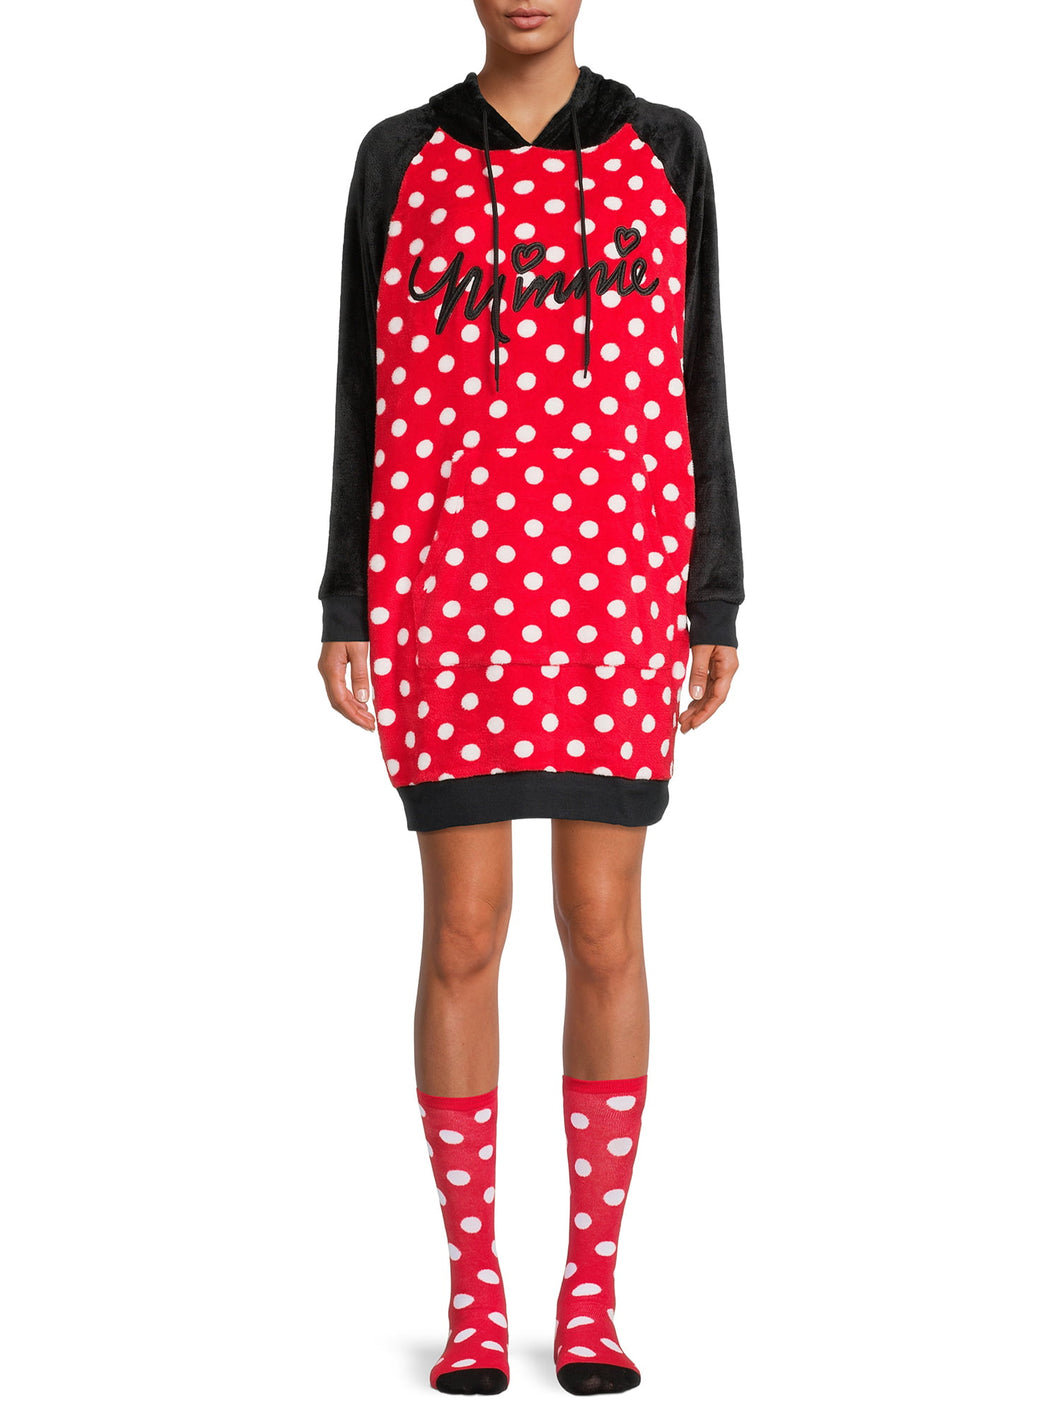 Womens Hooded Sleepshirt Lounger with Socks - Grinch, Stitch, Minnie Mouse